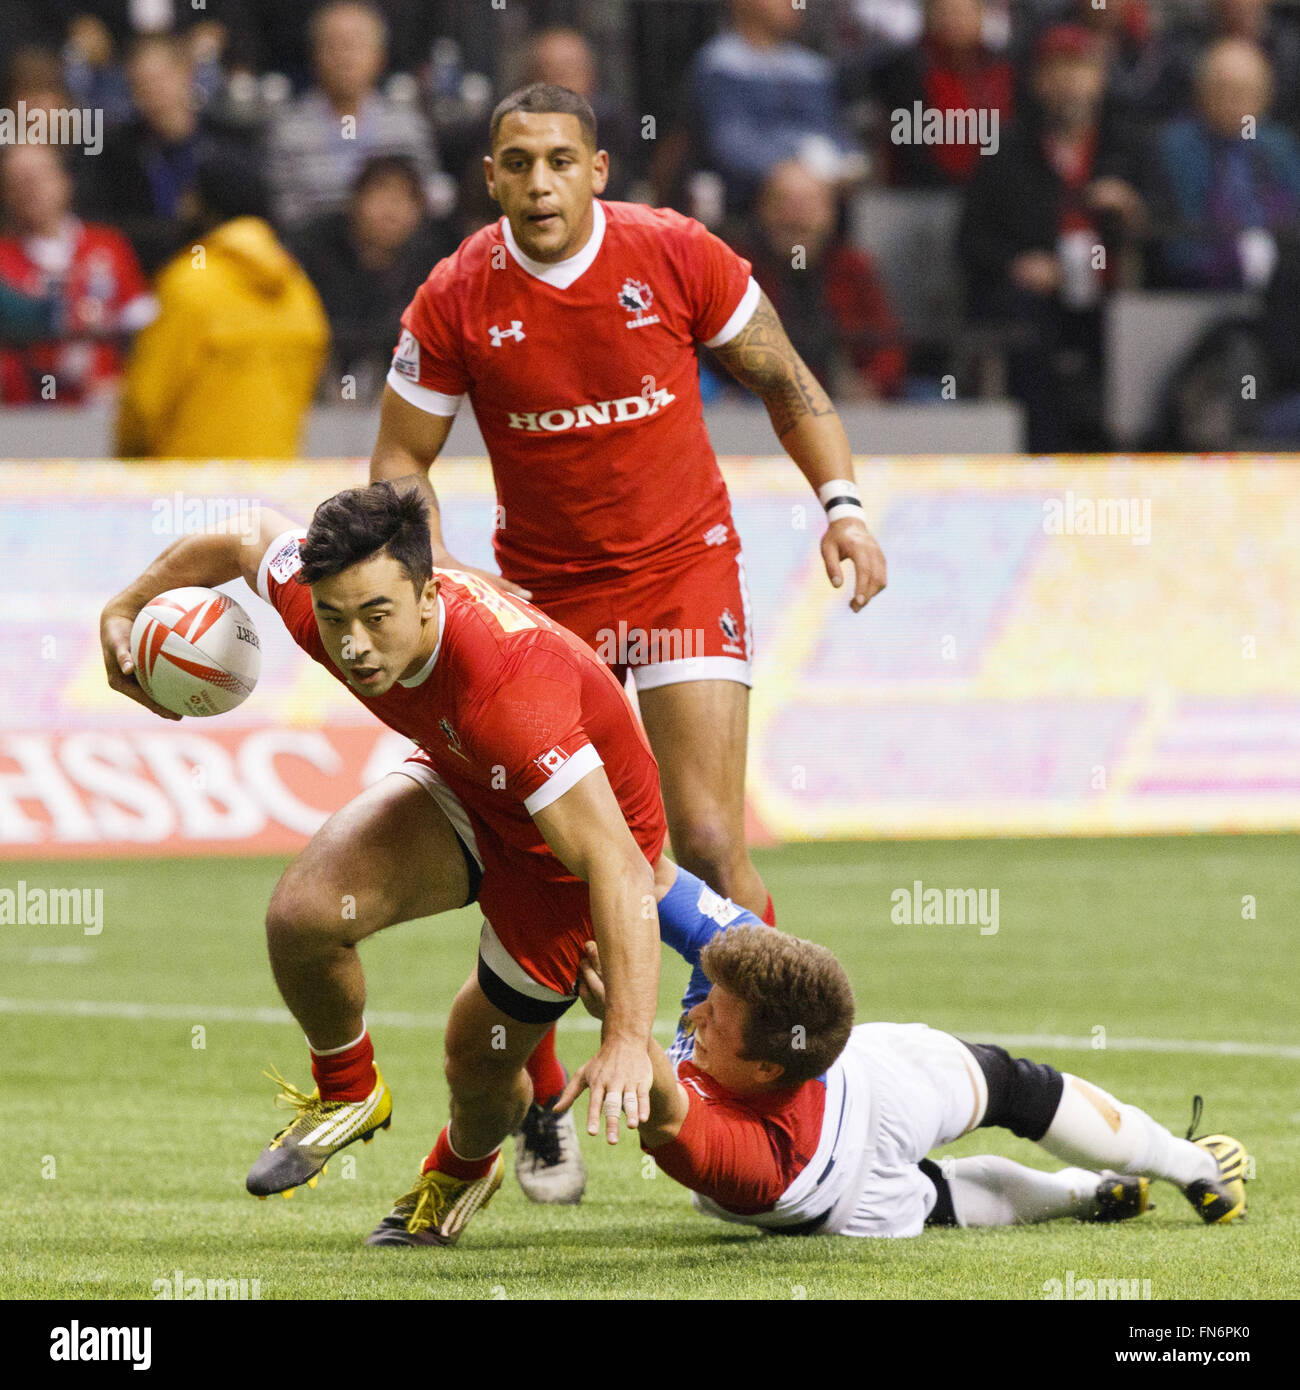 Vancouver, BC, Canada. 13th Mar, 2016. France (White) vs Canada (Red) during the Bowl Final of the HSBC World Rugby Sevens Series at BC Place Stadium in Vancouver, BC, Canada. Canada won 19-17. Credit:  Andrew Chin/ZUMA Wire/ZUMAPRESS.com/Alamy Live News Stock Photo